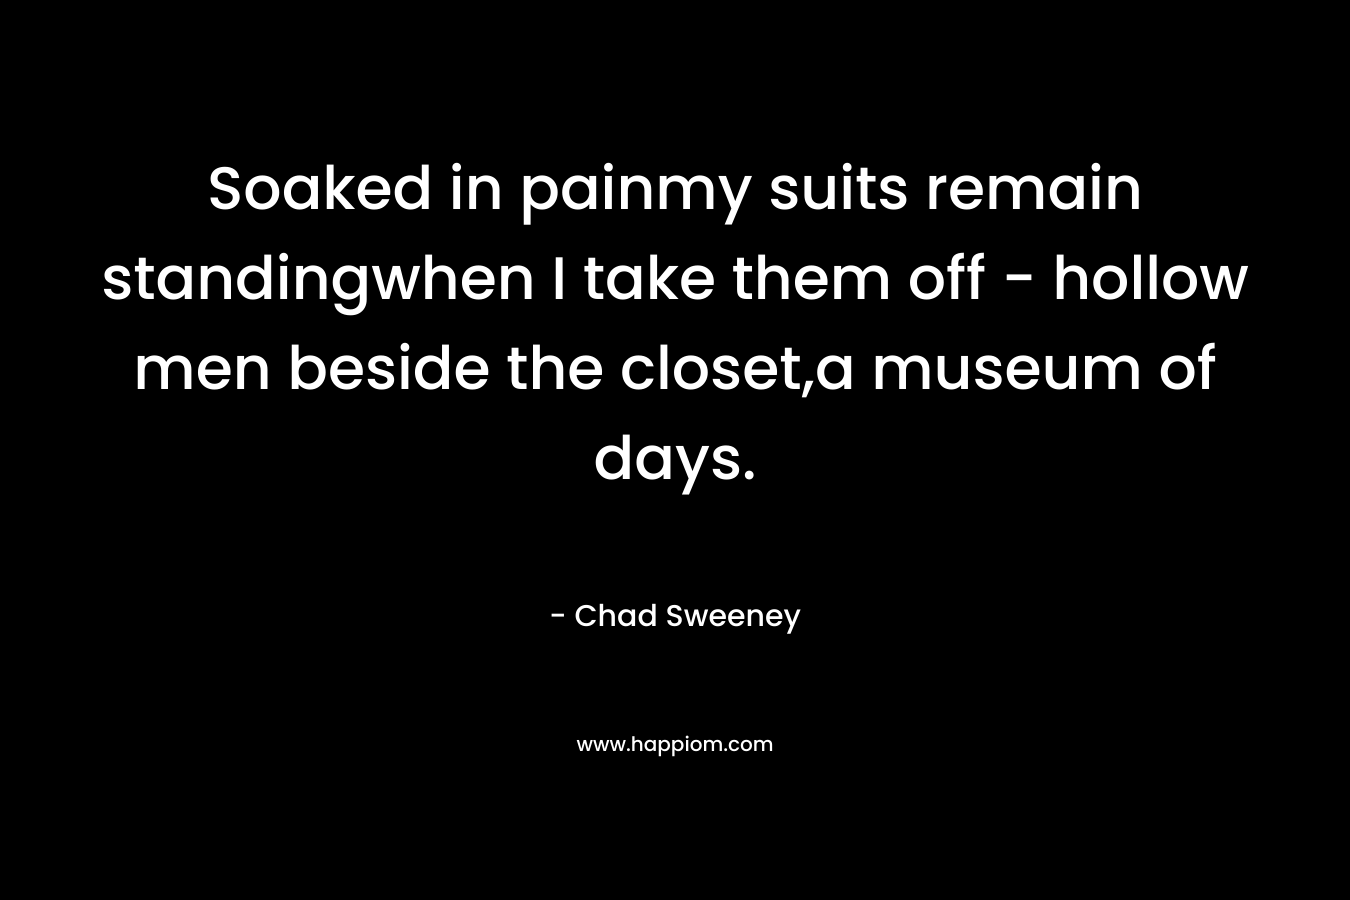 Soaked in painmy suits remain standingwhen I take them off - hollow men beside the closet,a museum of days.